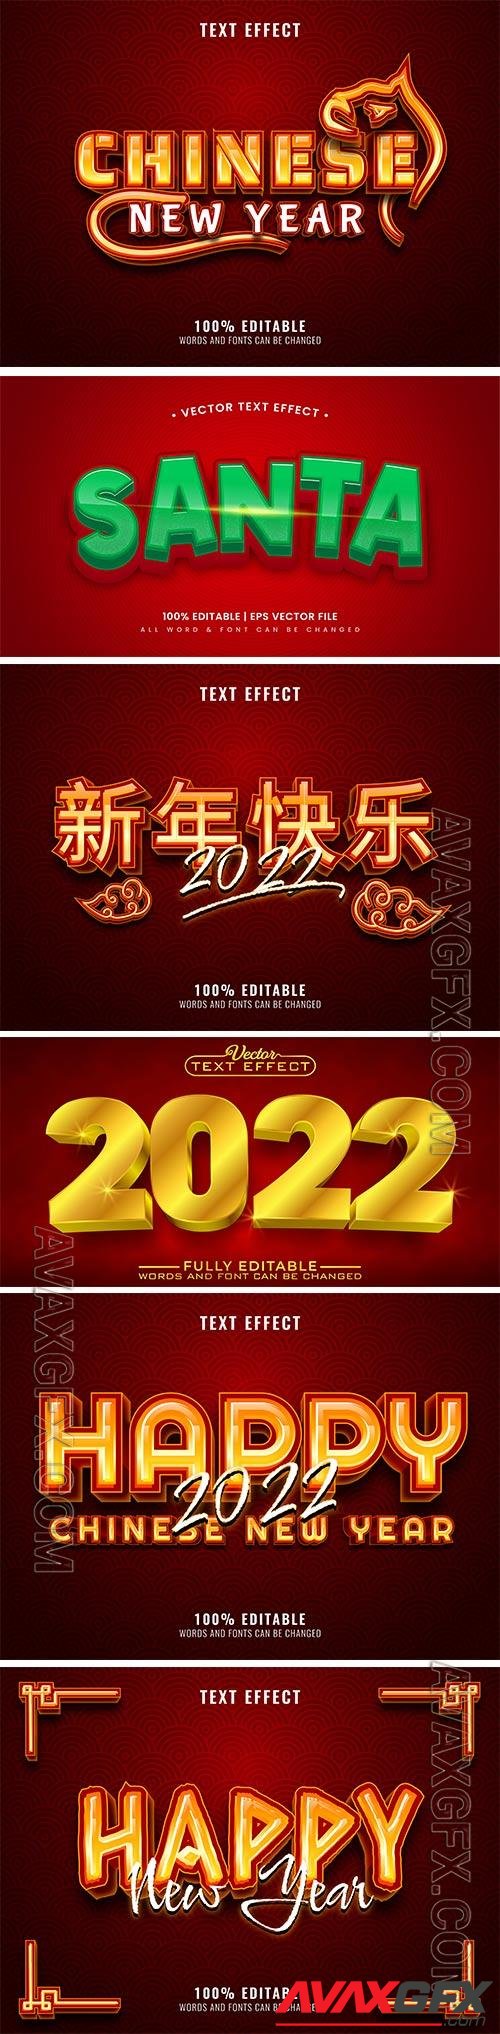 Chinese New year text vector effect